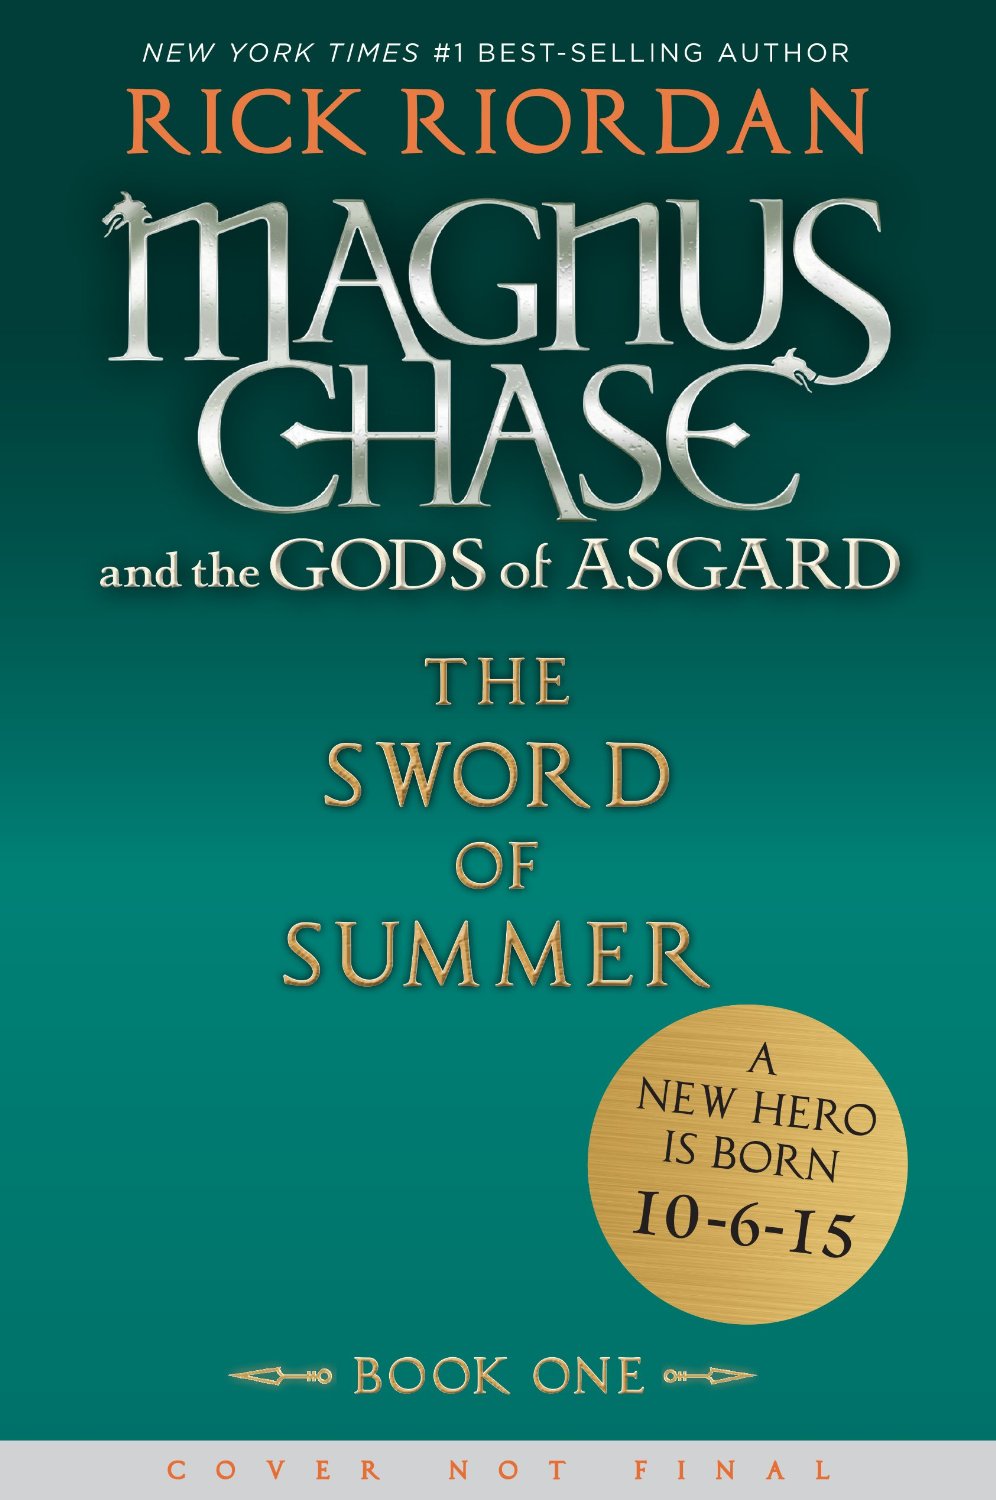 ‘the sword of summer’ sneak peek is intriguing and exciting